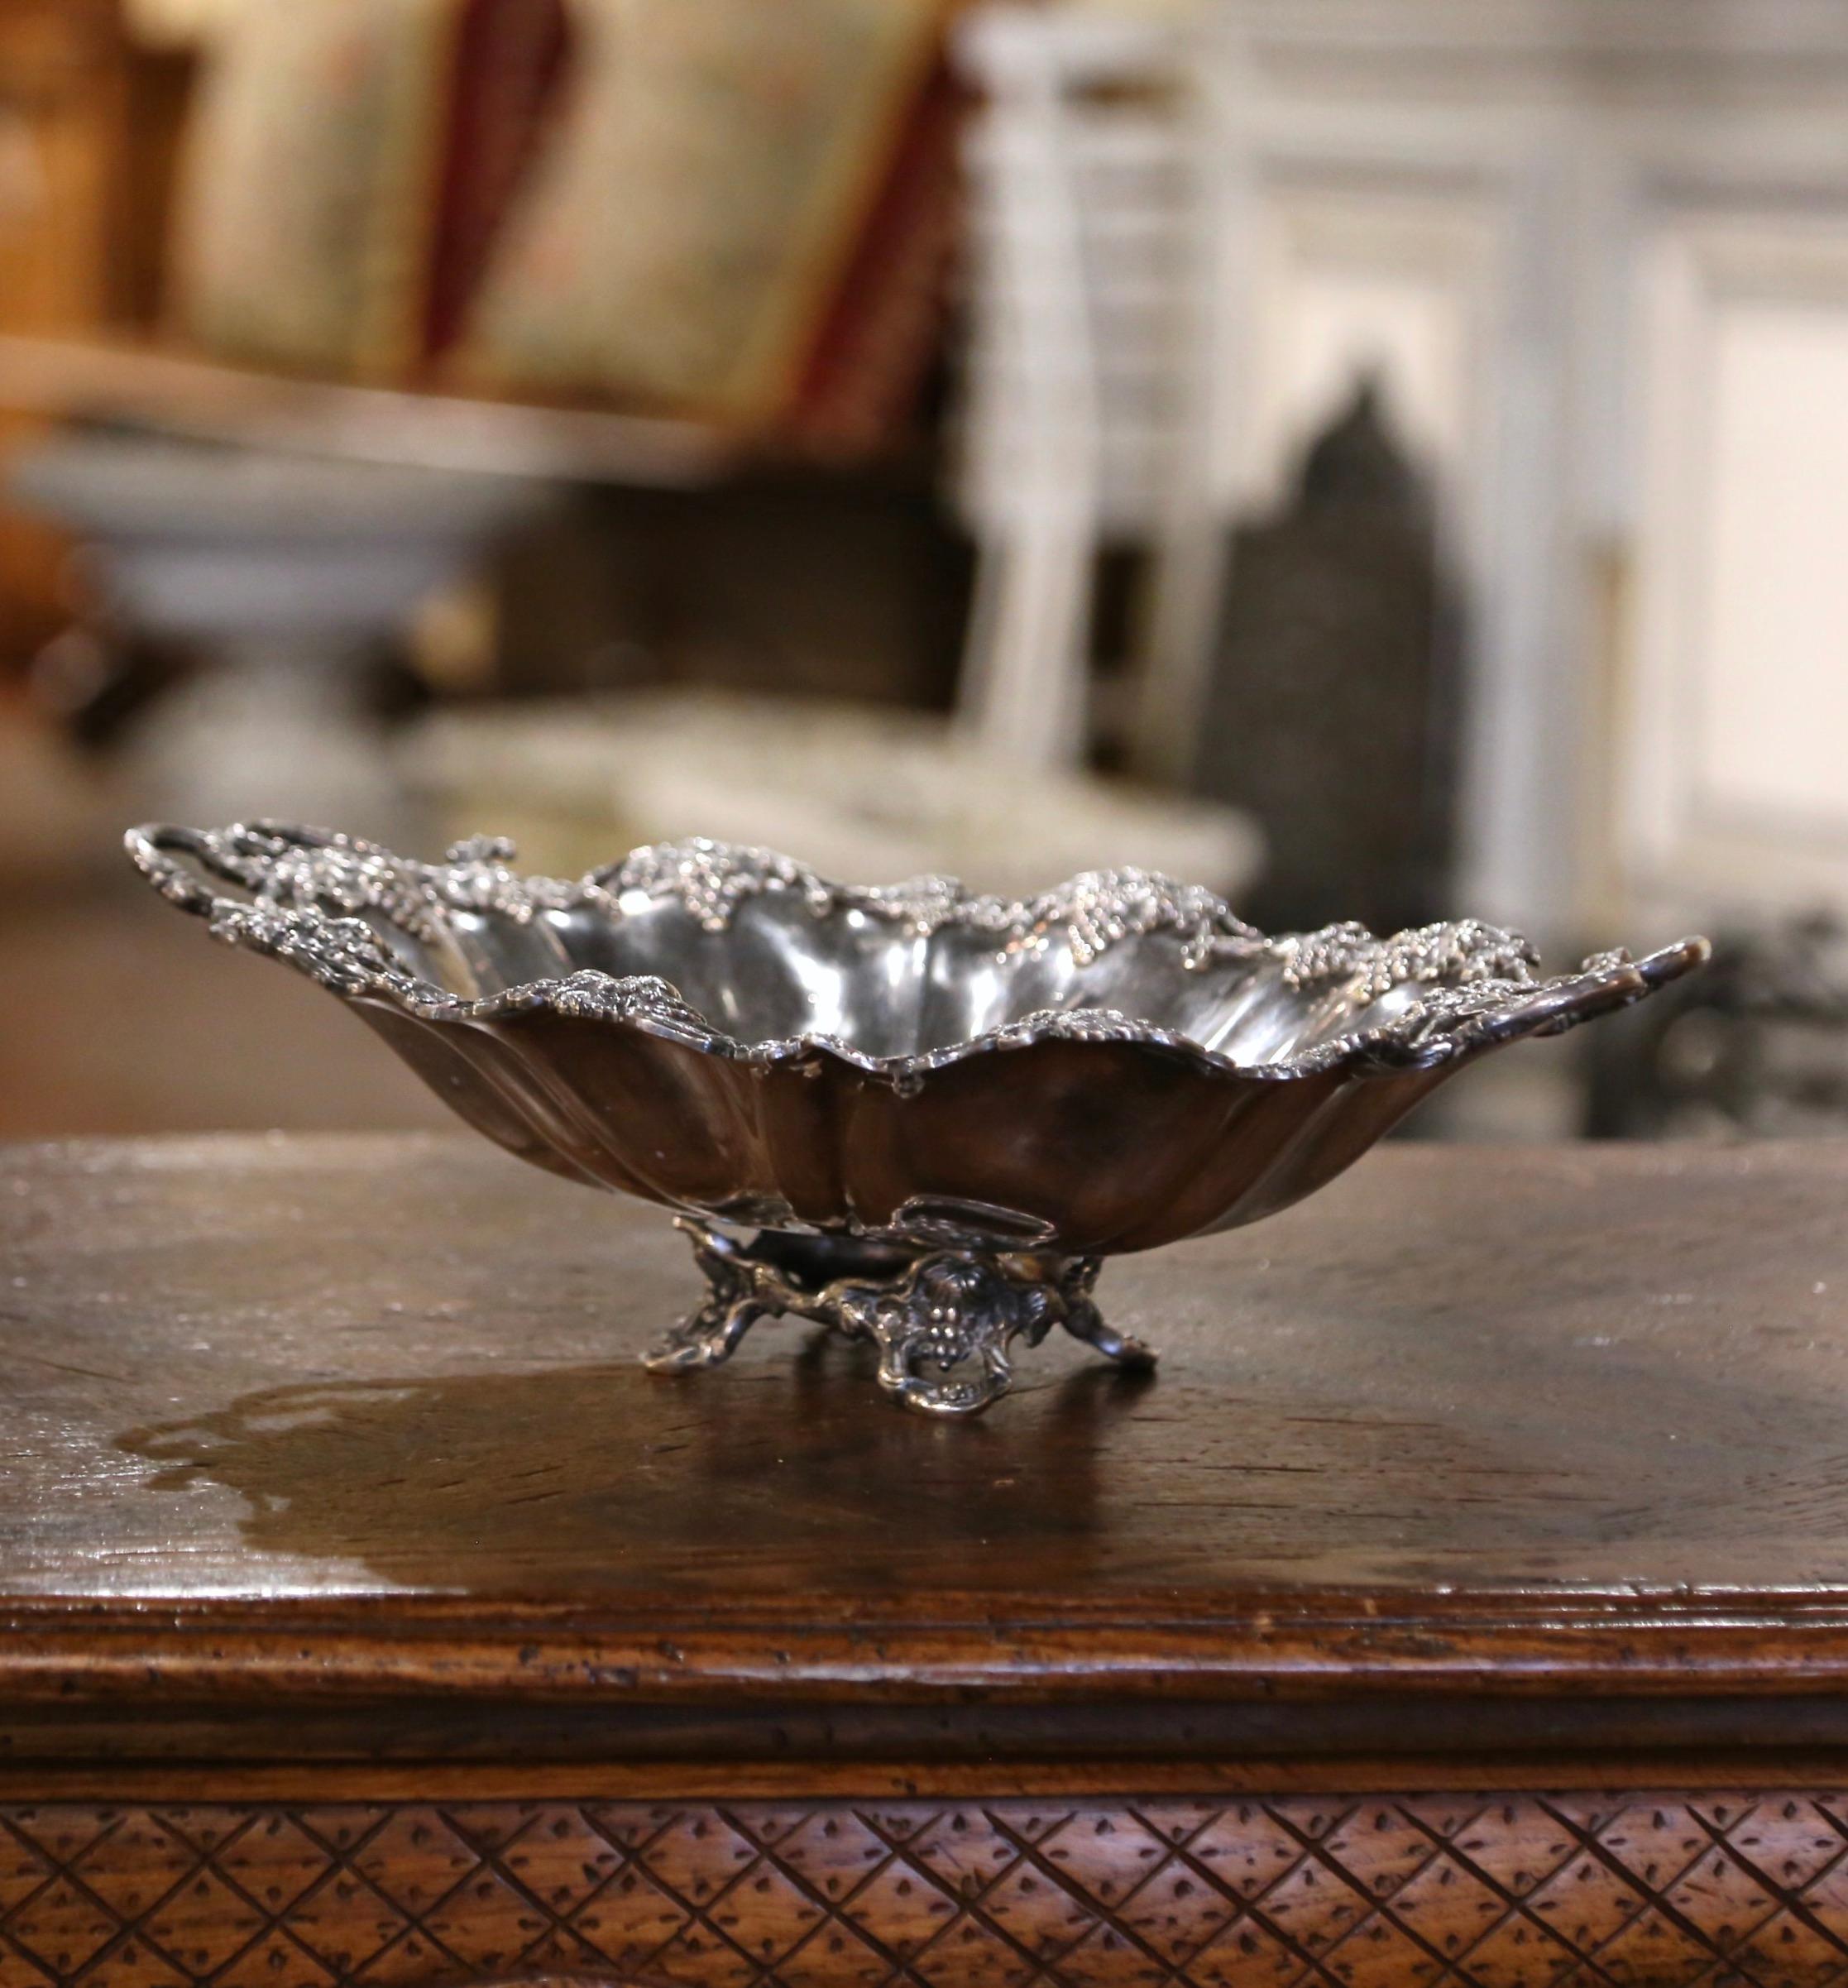 Serve your baguette or crackers in style in this elegant bread tray. Crafted in France circa 1870 and oval in shape with side handles, the dish stands on four feet, and features intricate grape and vine motifs in high relief. The display tray is in